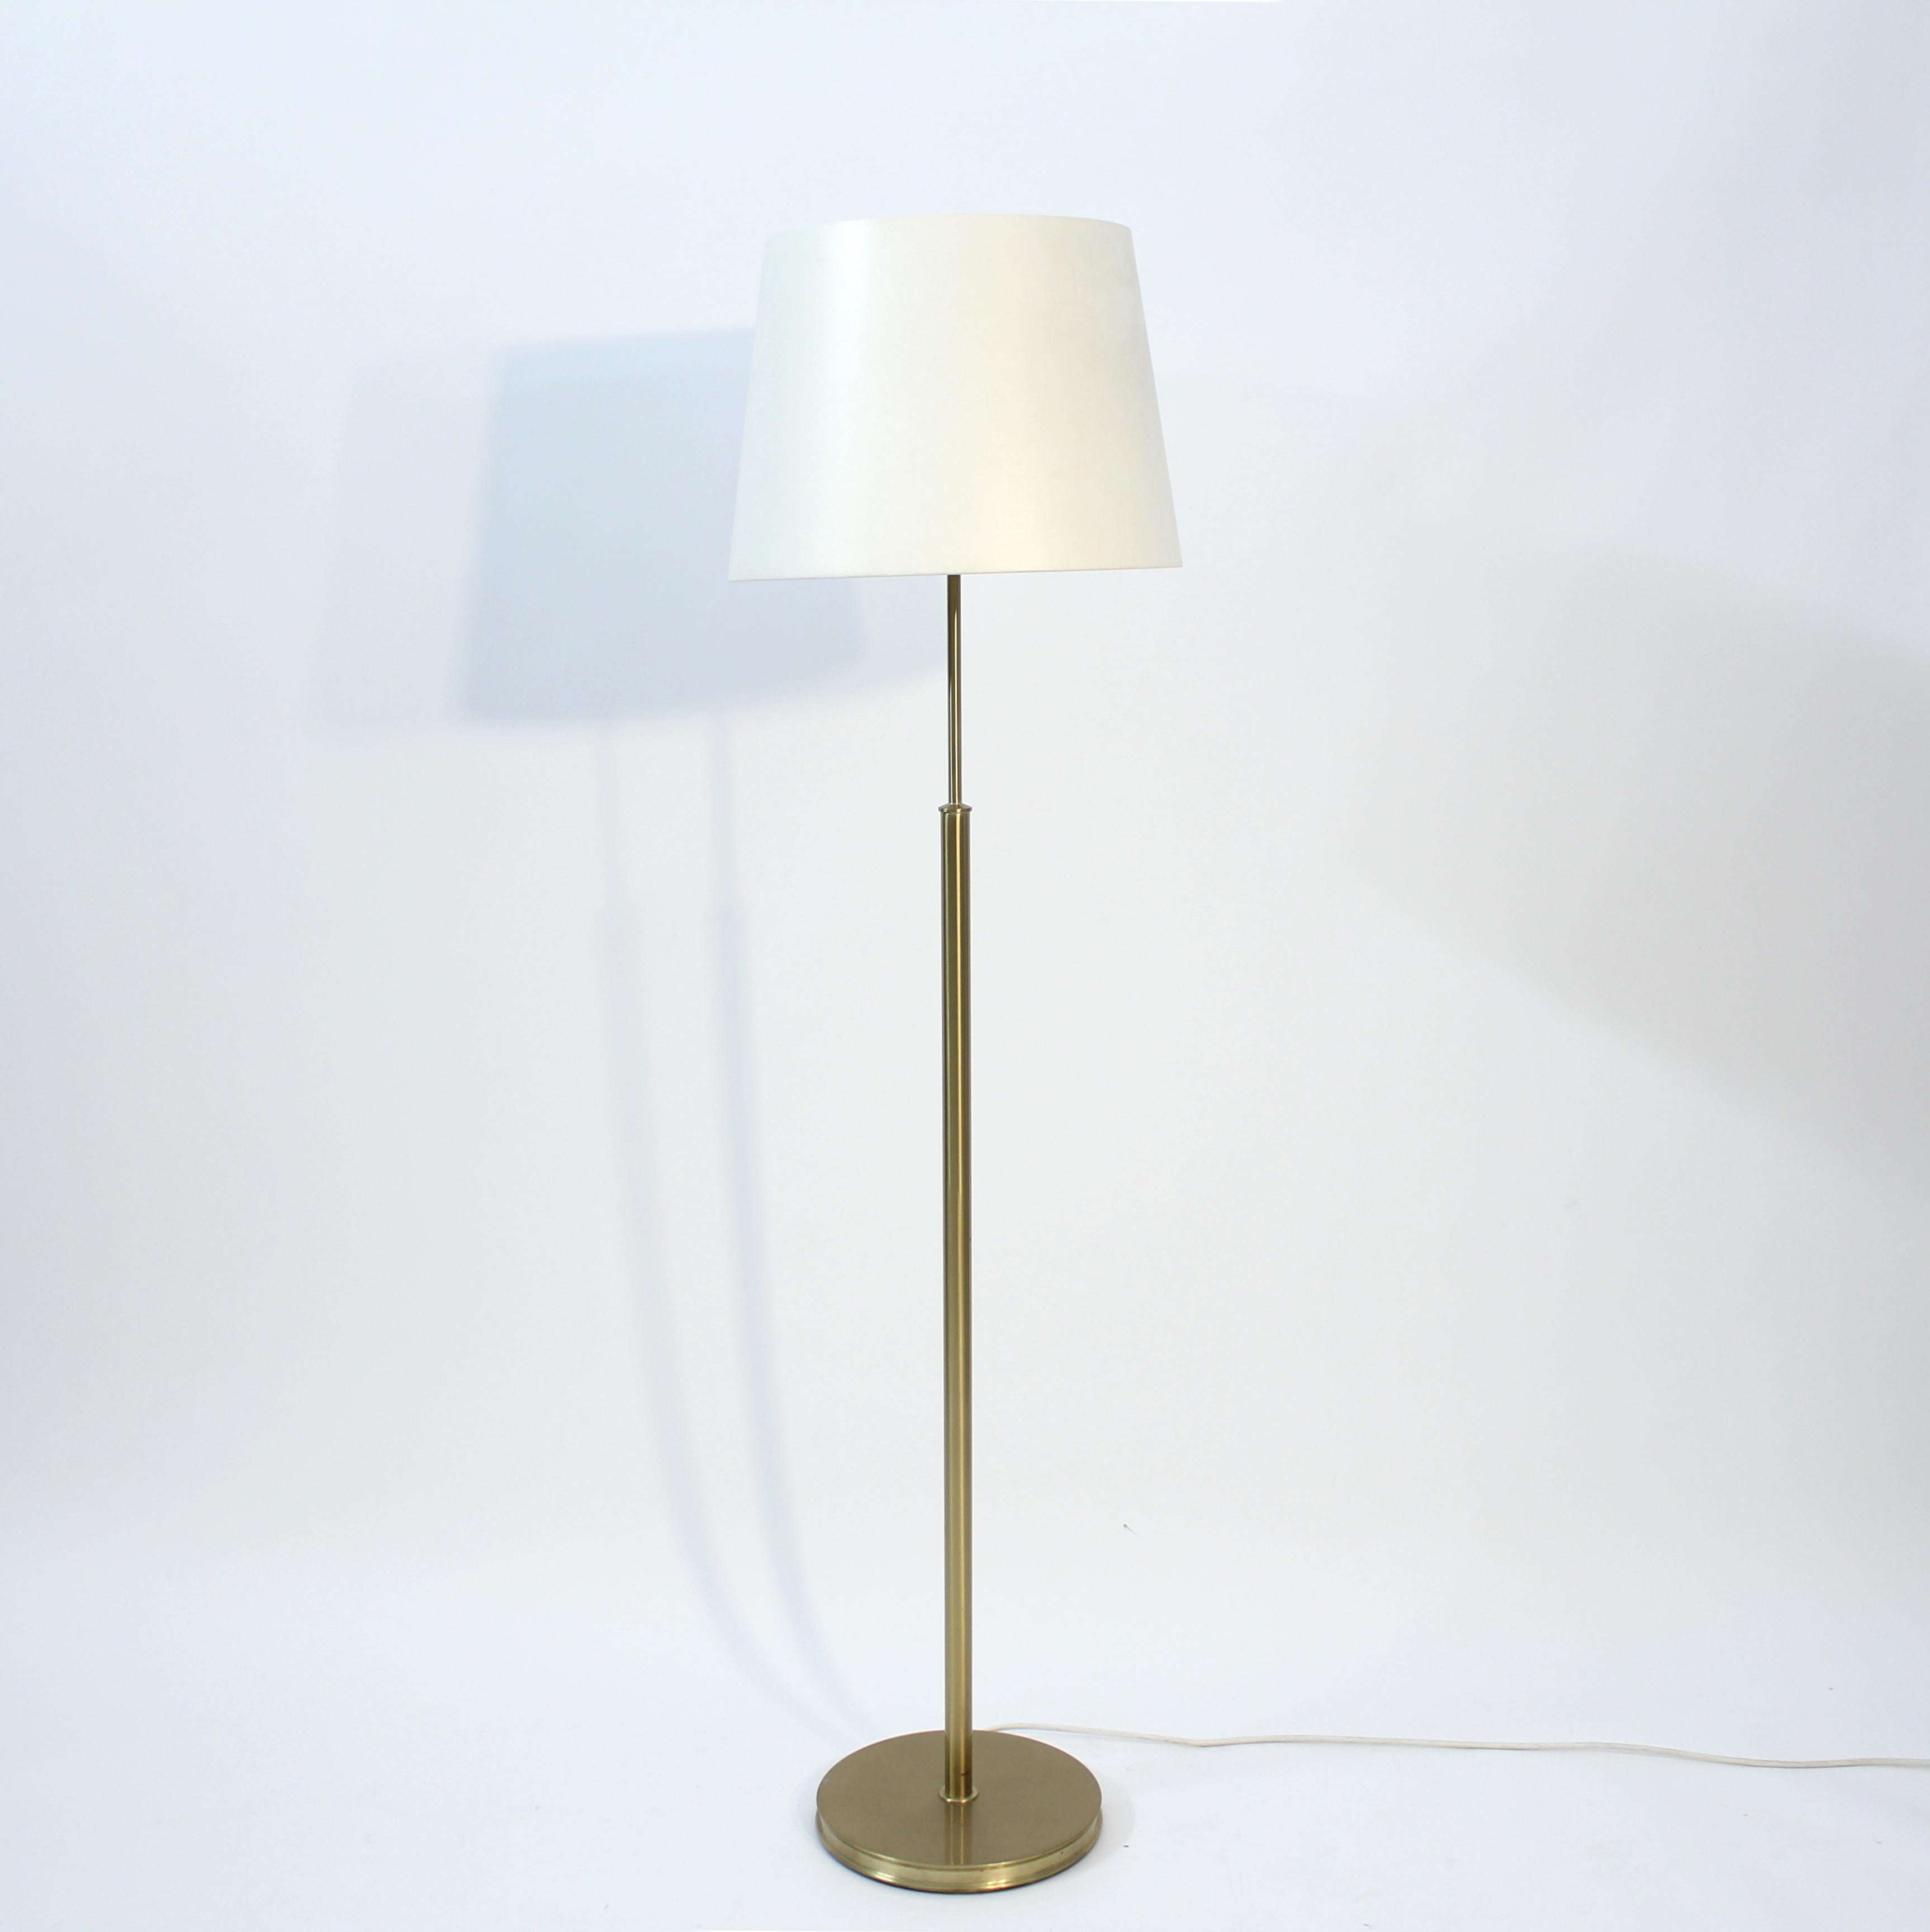 Floor lamp in brass, model 2148, designed by Josef Frank for Svenskt Tenn in the 1940s. This example is most likely from the 1980s. All the brass is in a very good condition with light ware consistent with age and use. The shade is in overall in